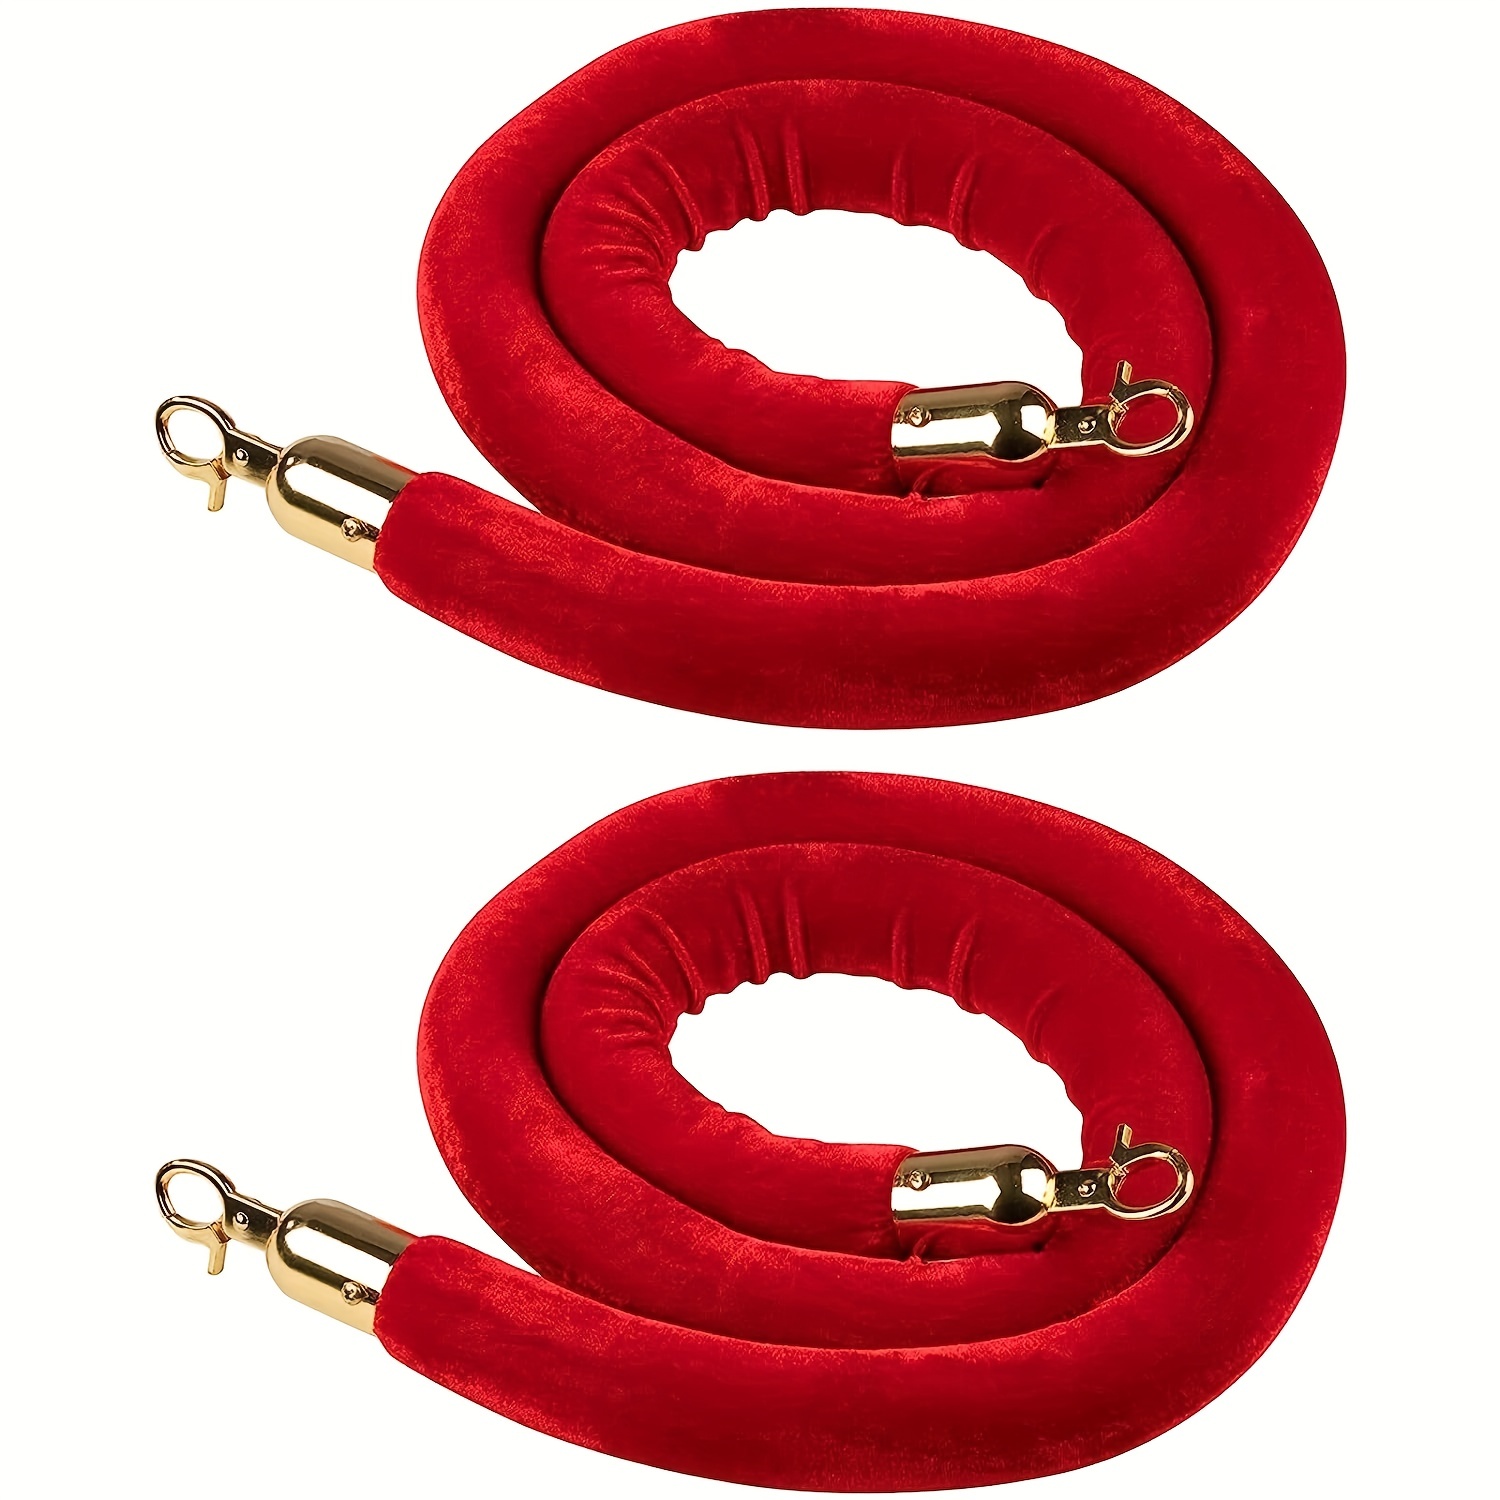 

Red Velvet Rope Fixed Rope 4.9 Feet (about 1.5 Meters) Crowd Control Barrier With Polished Golden Hook